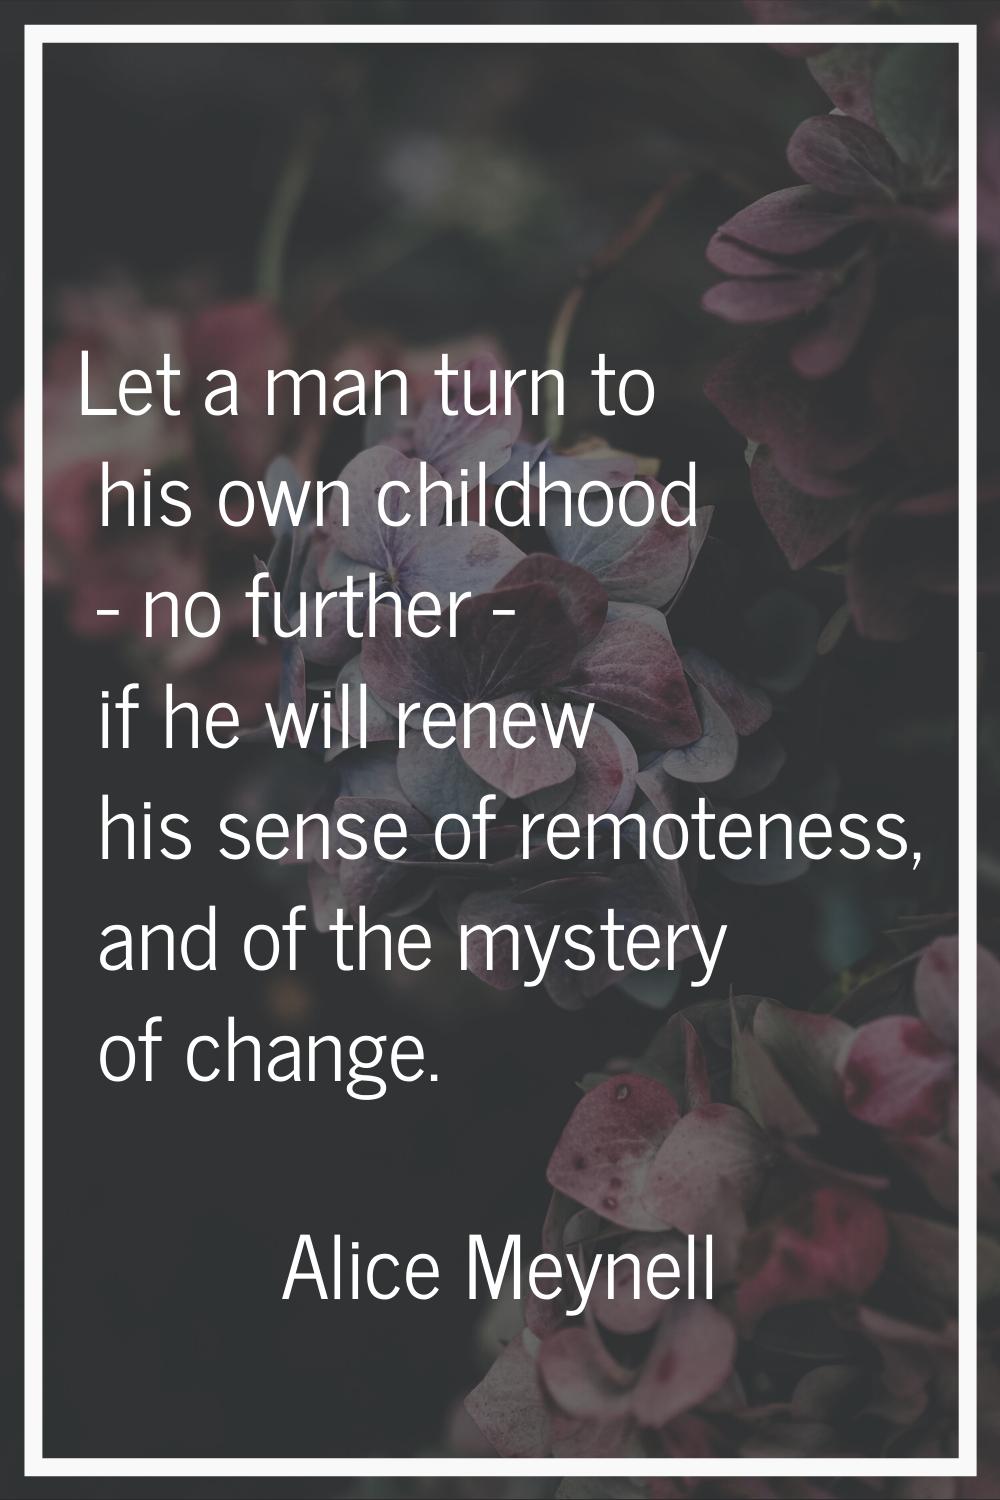 Let a man turn to his own childhood - no further - if he will renew his sense of remoteness, and of